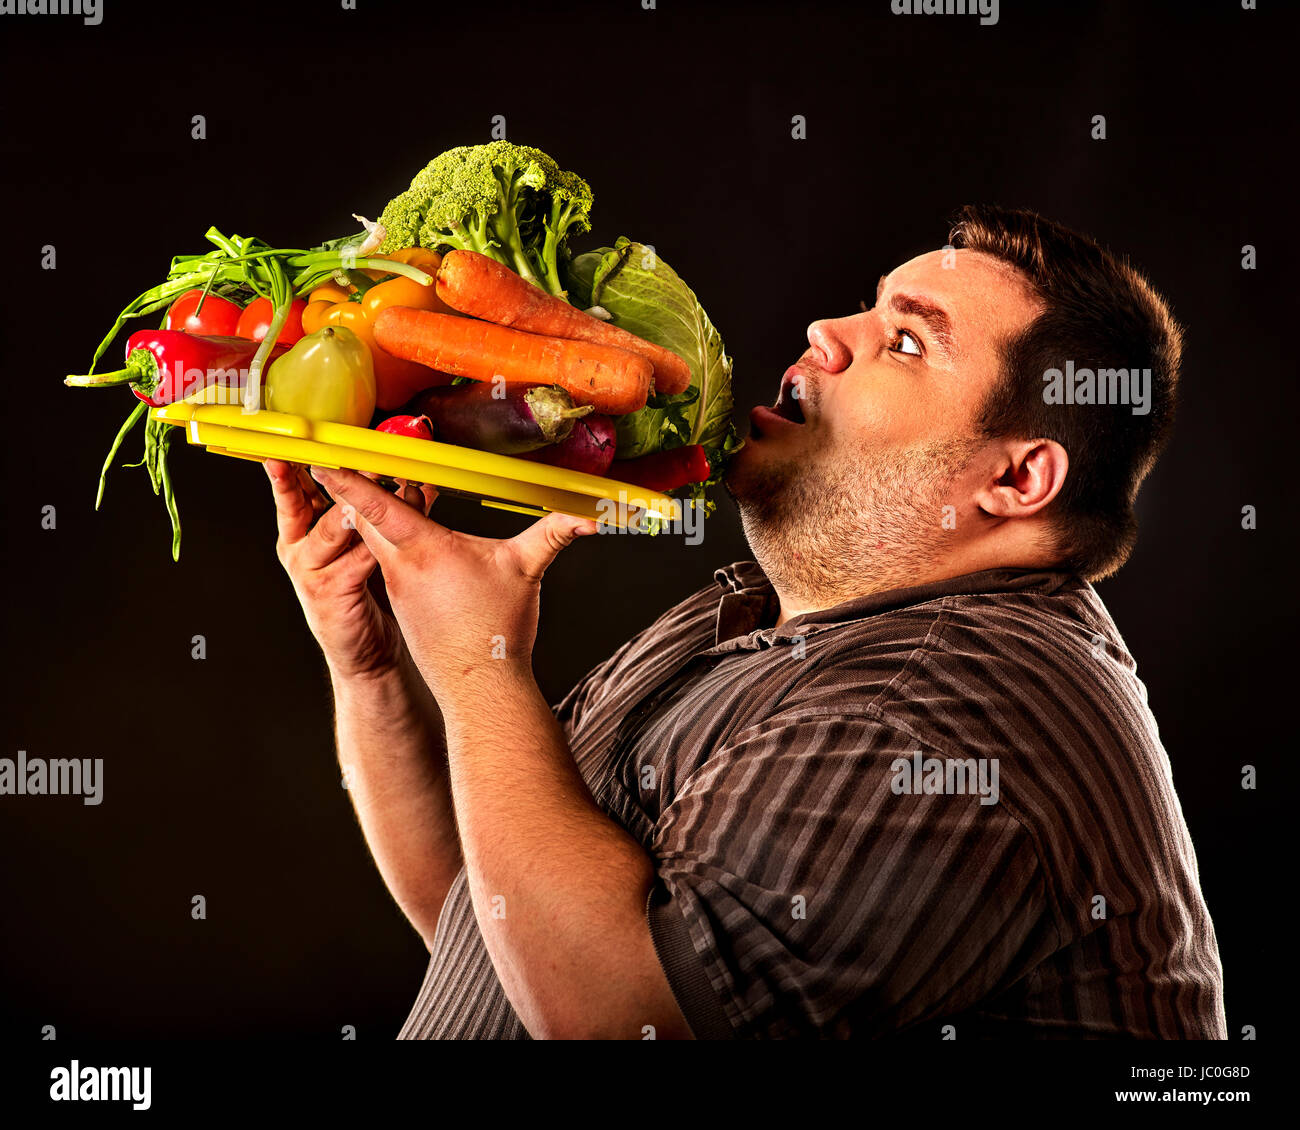 Albums 96+ Images pictures of people eating food Superb